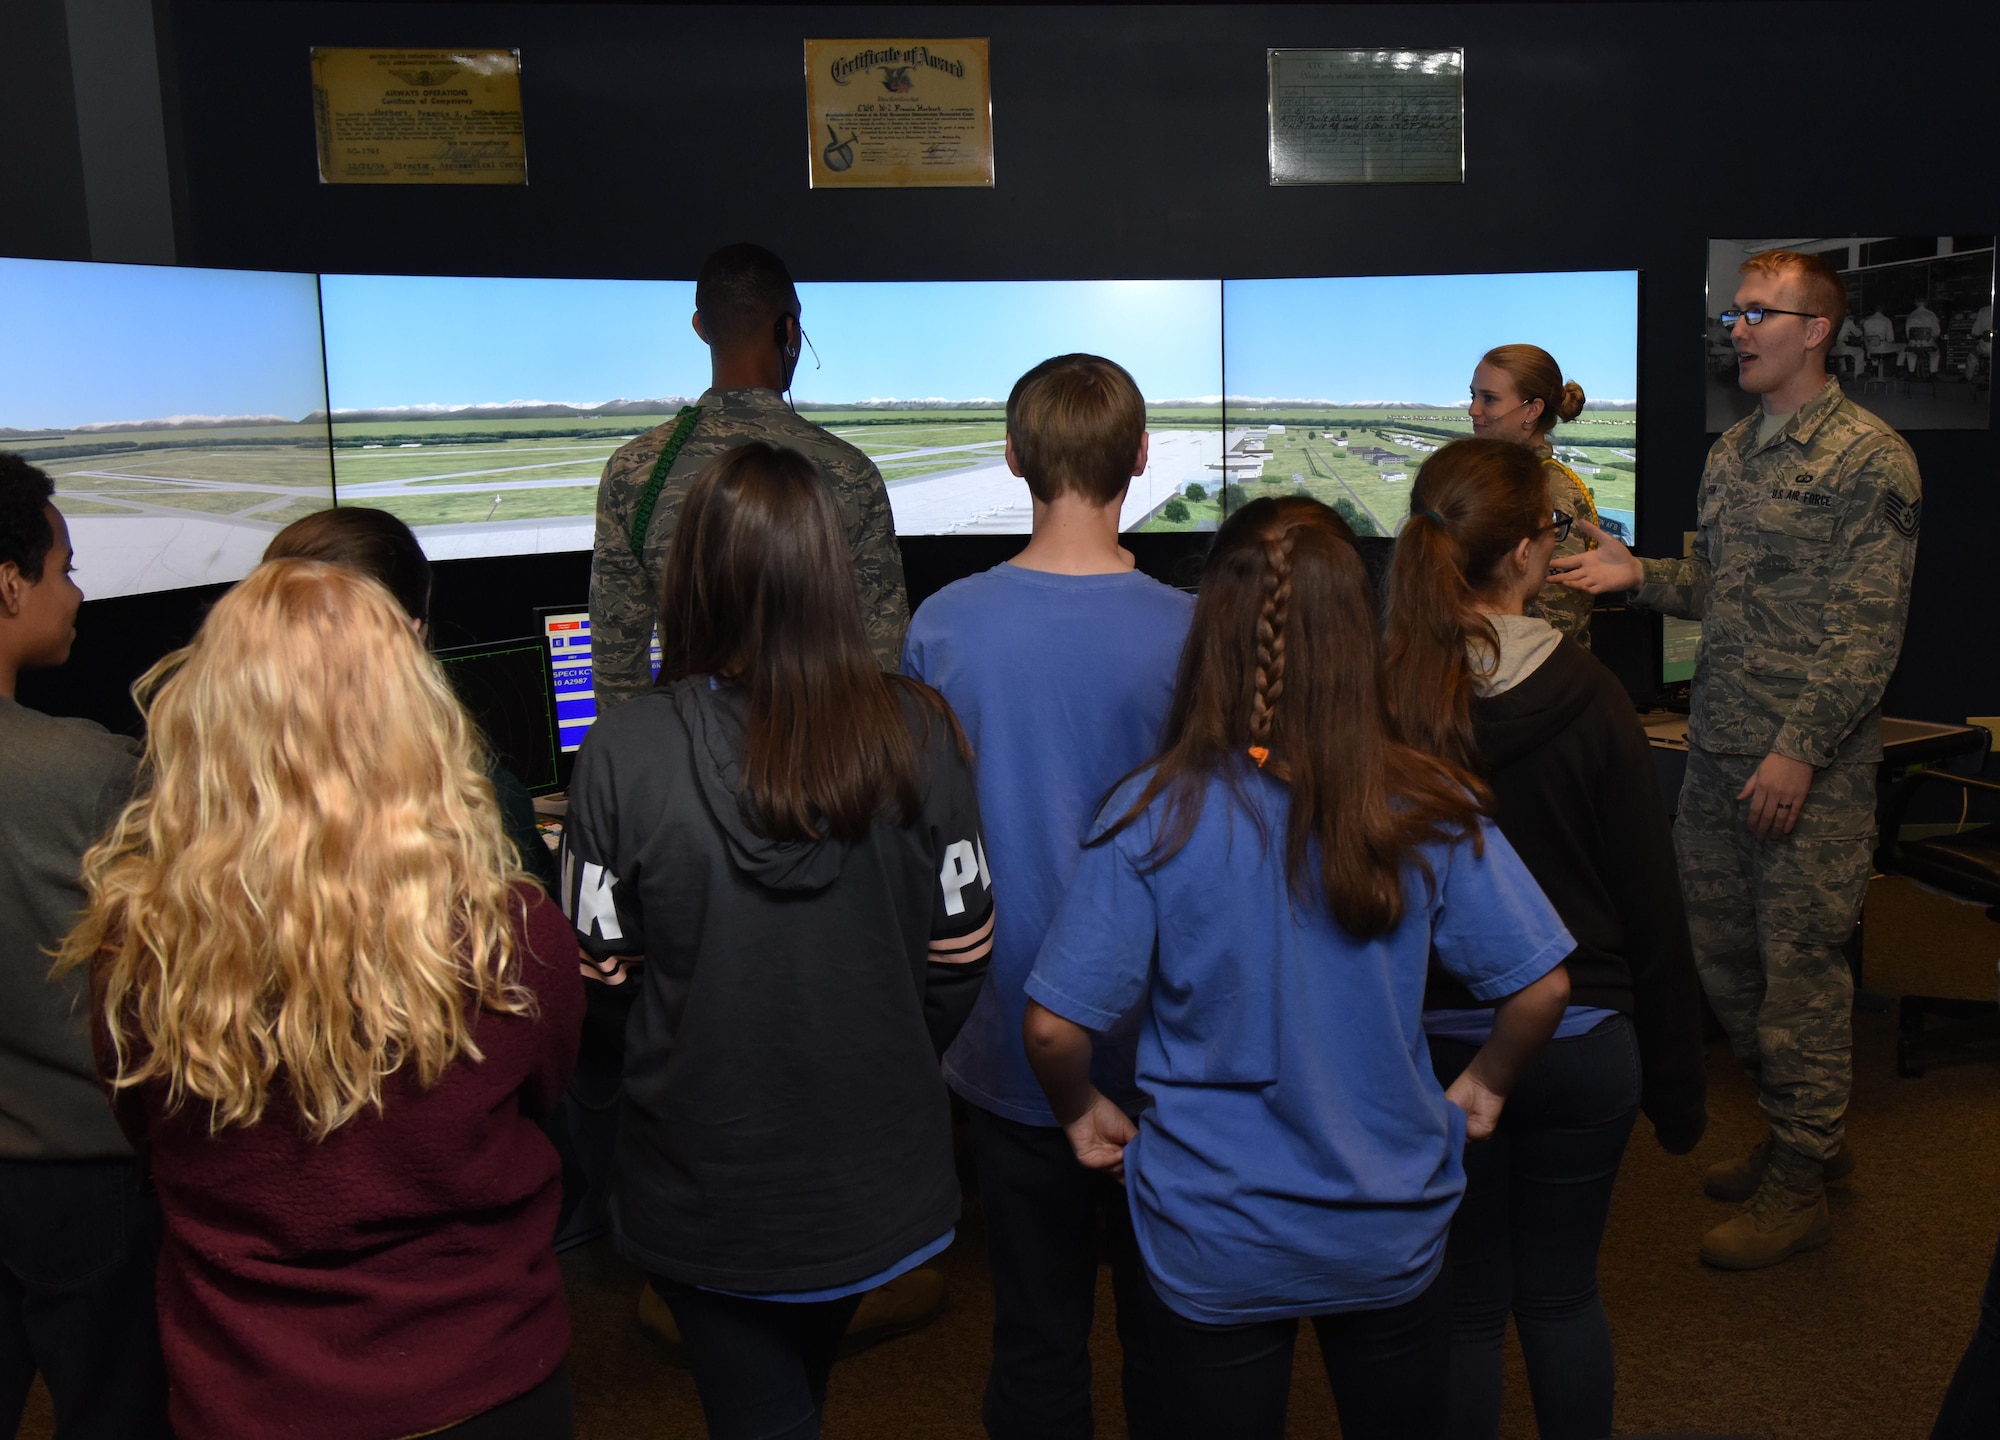 Tech. Sgt. William Olson, 334th Training Squadron instructor, briefs local high school freshmen on the air traffic control course at Cody Hall during the Biloxi Chamber of Commerce Gulf Coast Junior Leadership Tour Jan. 24, 2017, on Keesler Air Force Base, Miss. The group’s objective is to produce students of outstanding character, while teaching them about community needs and what it takes to become a leader in today’s society. The visit also included a military training leader briefing and a dorm tour. (U.S. Air Force photo by Kemberly Groue)